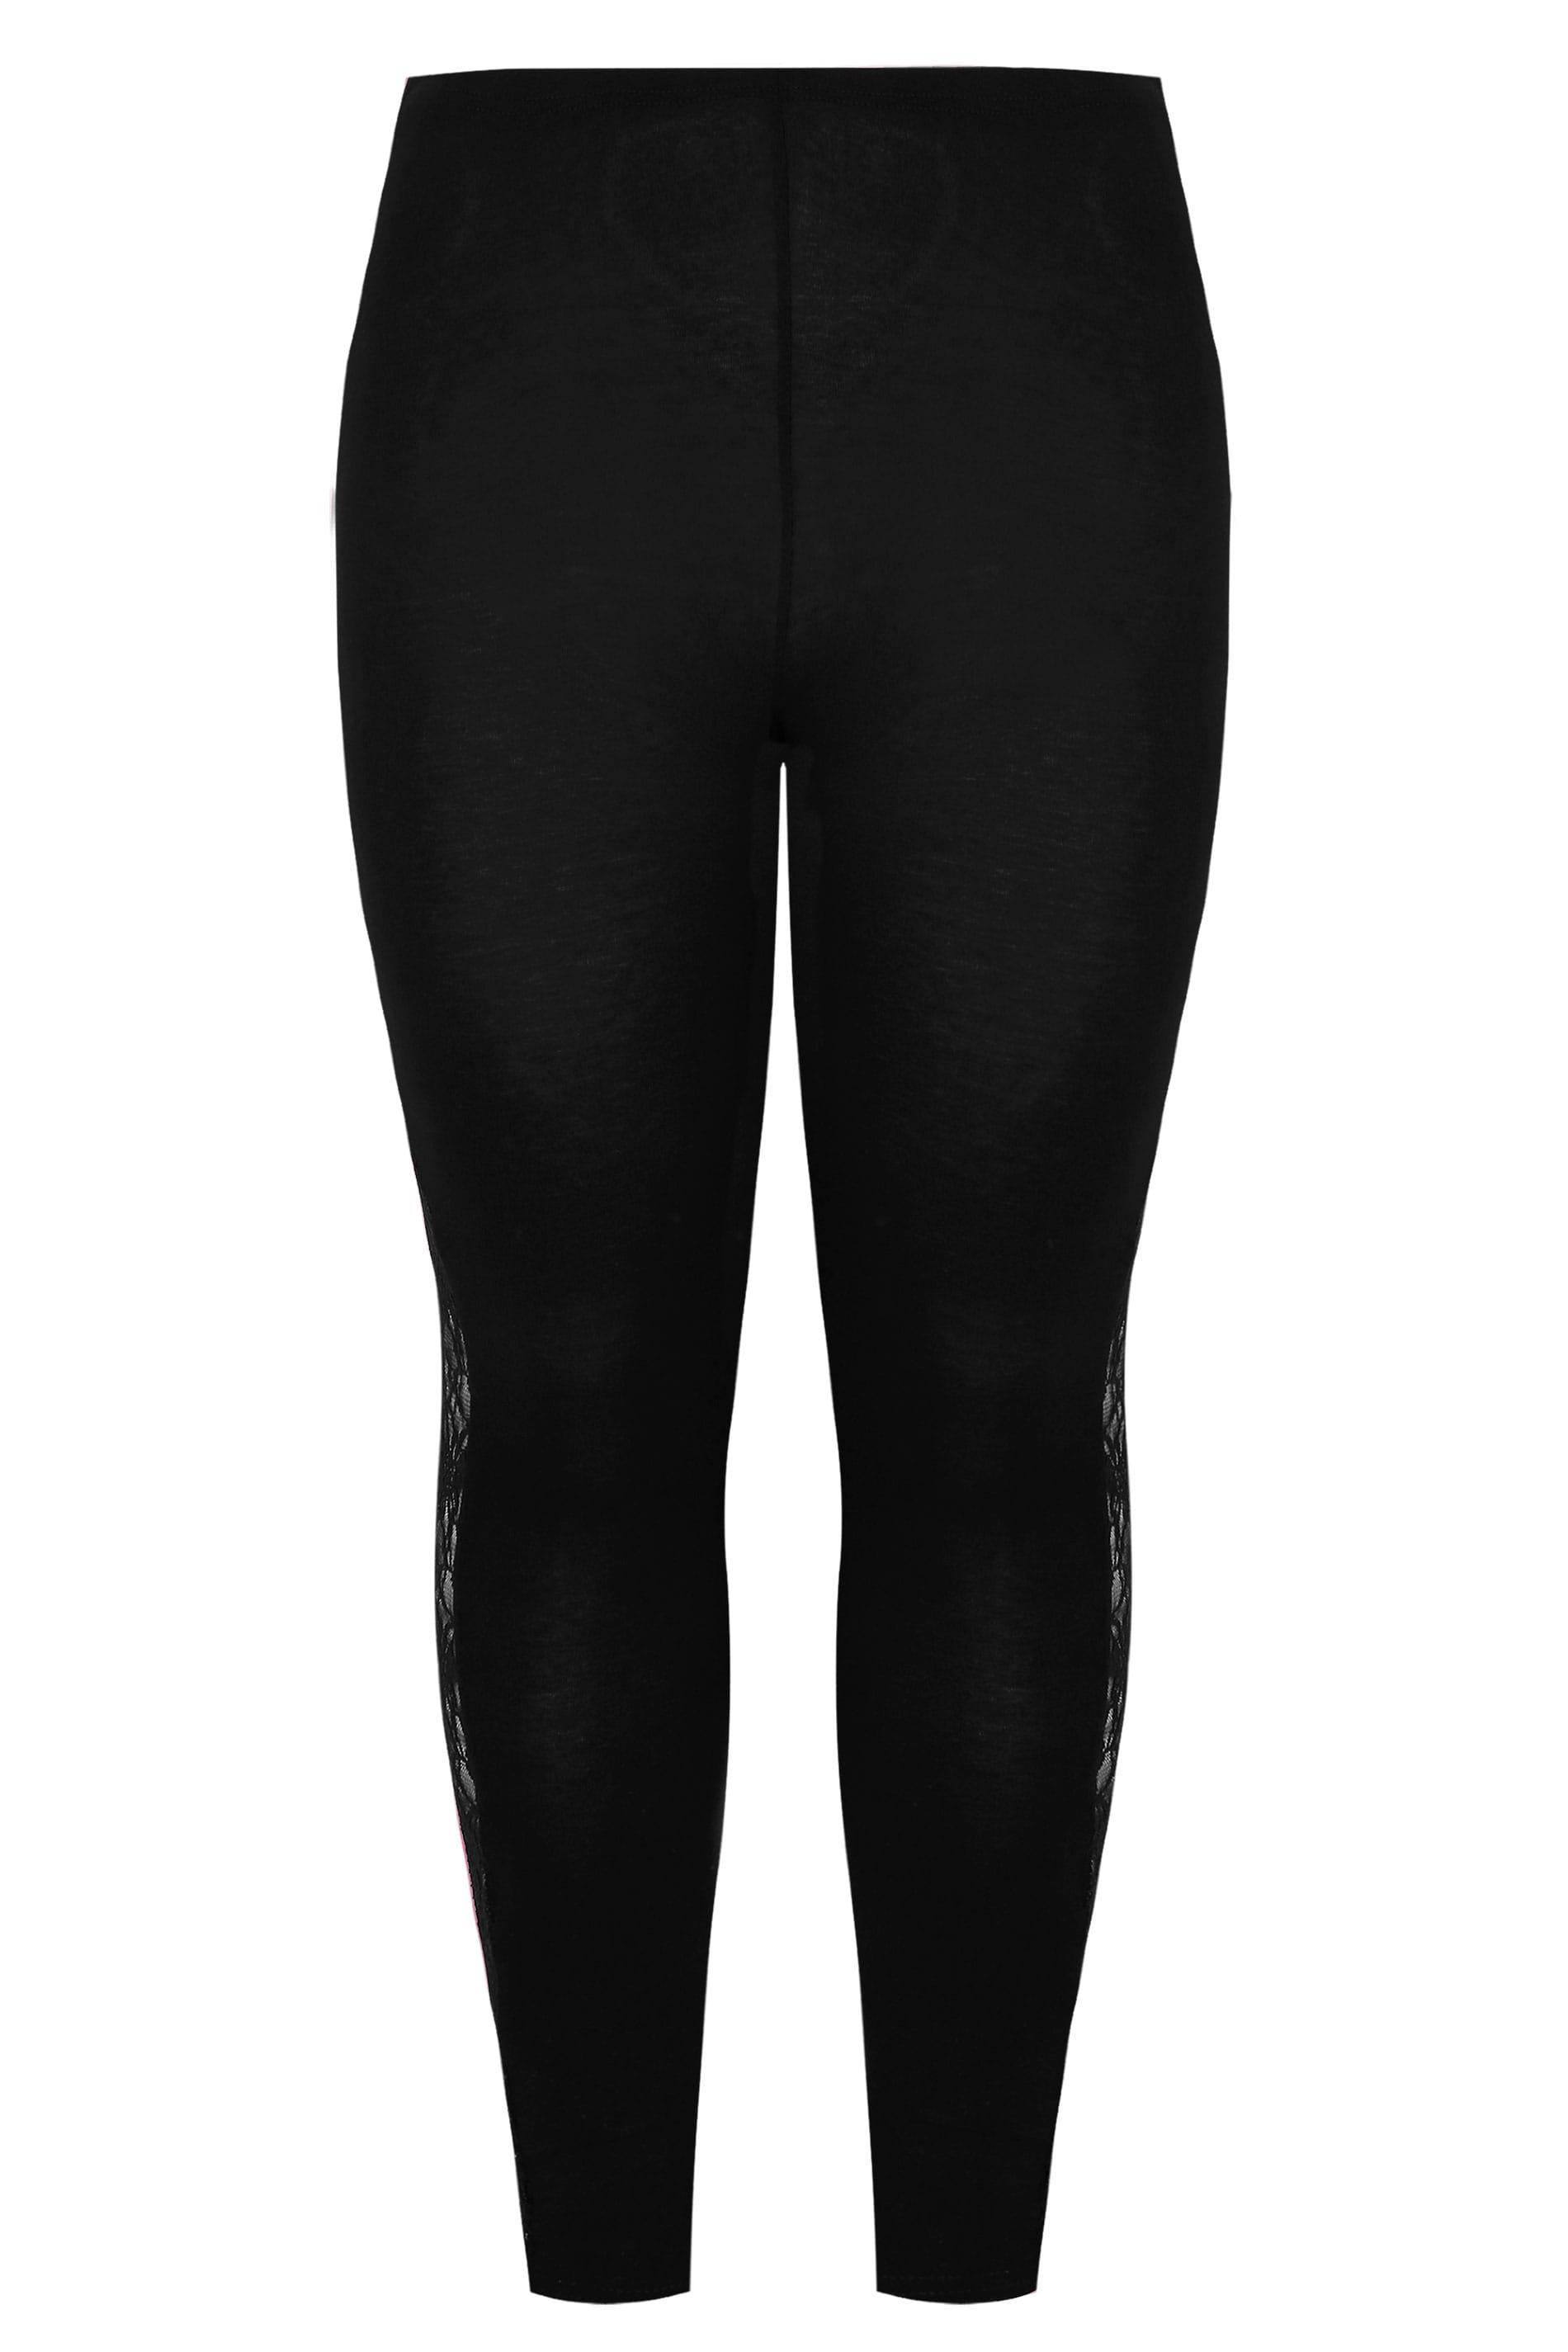 Black Leggings With Floral Lace Insert, Plus size 16 to 36